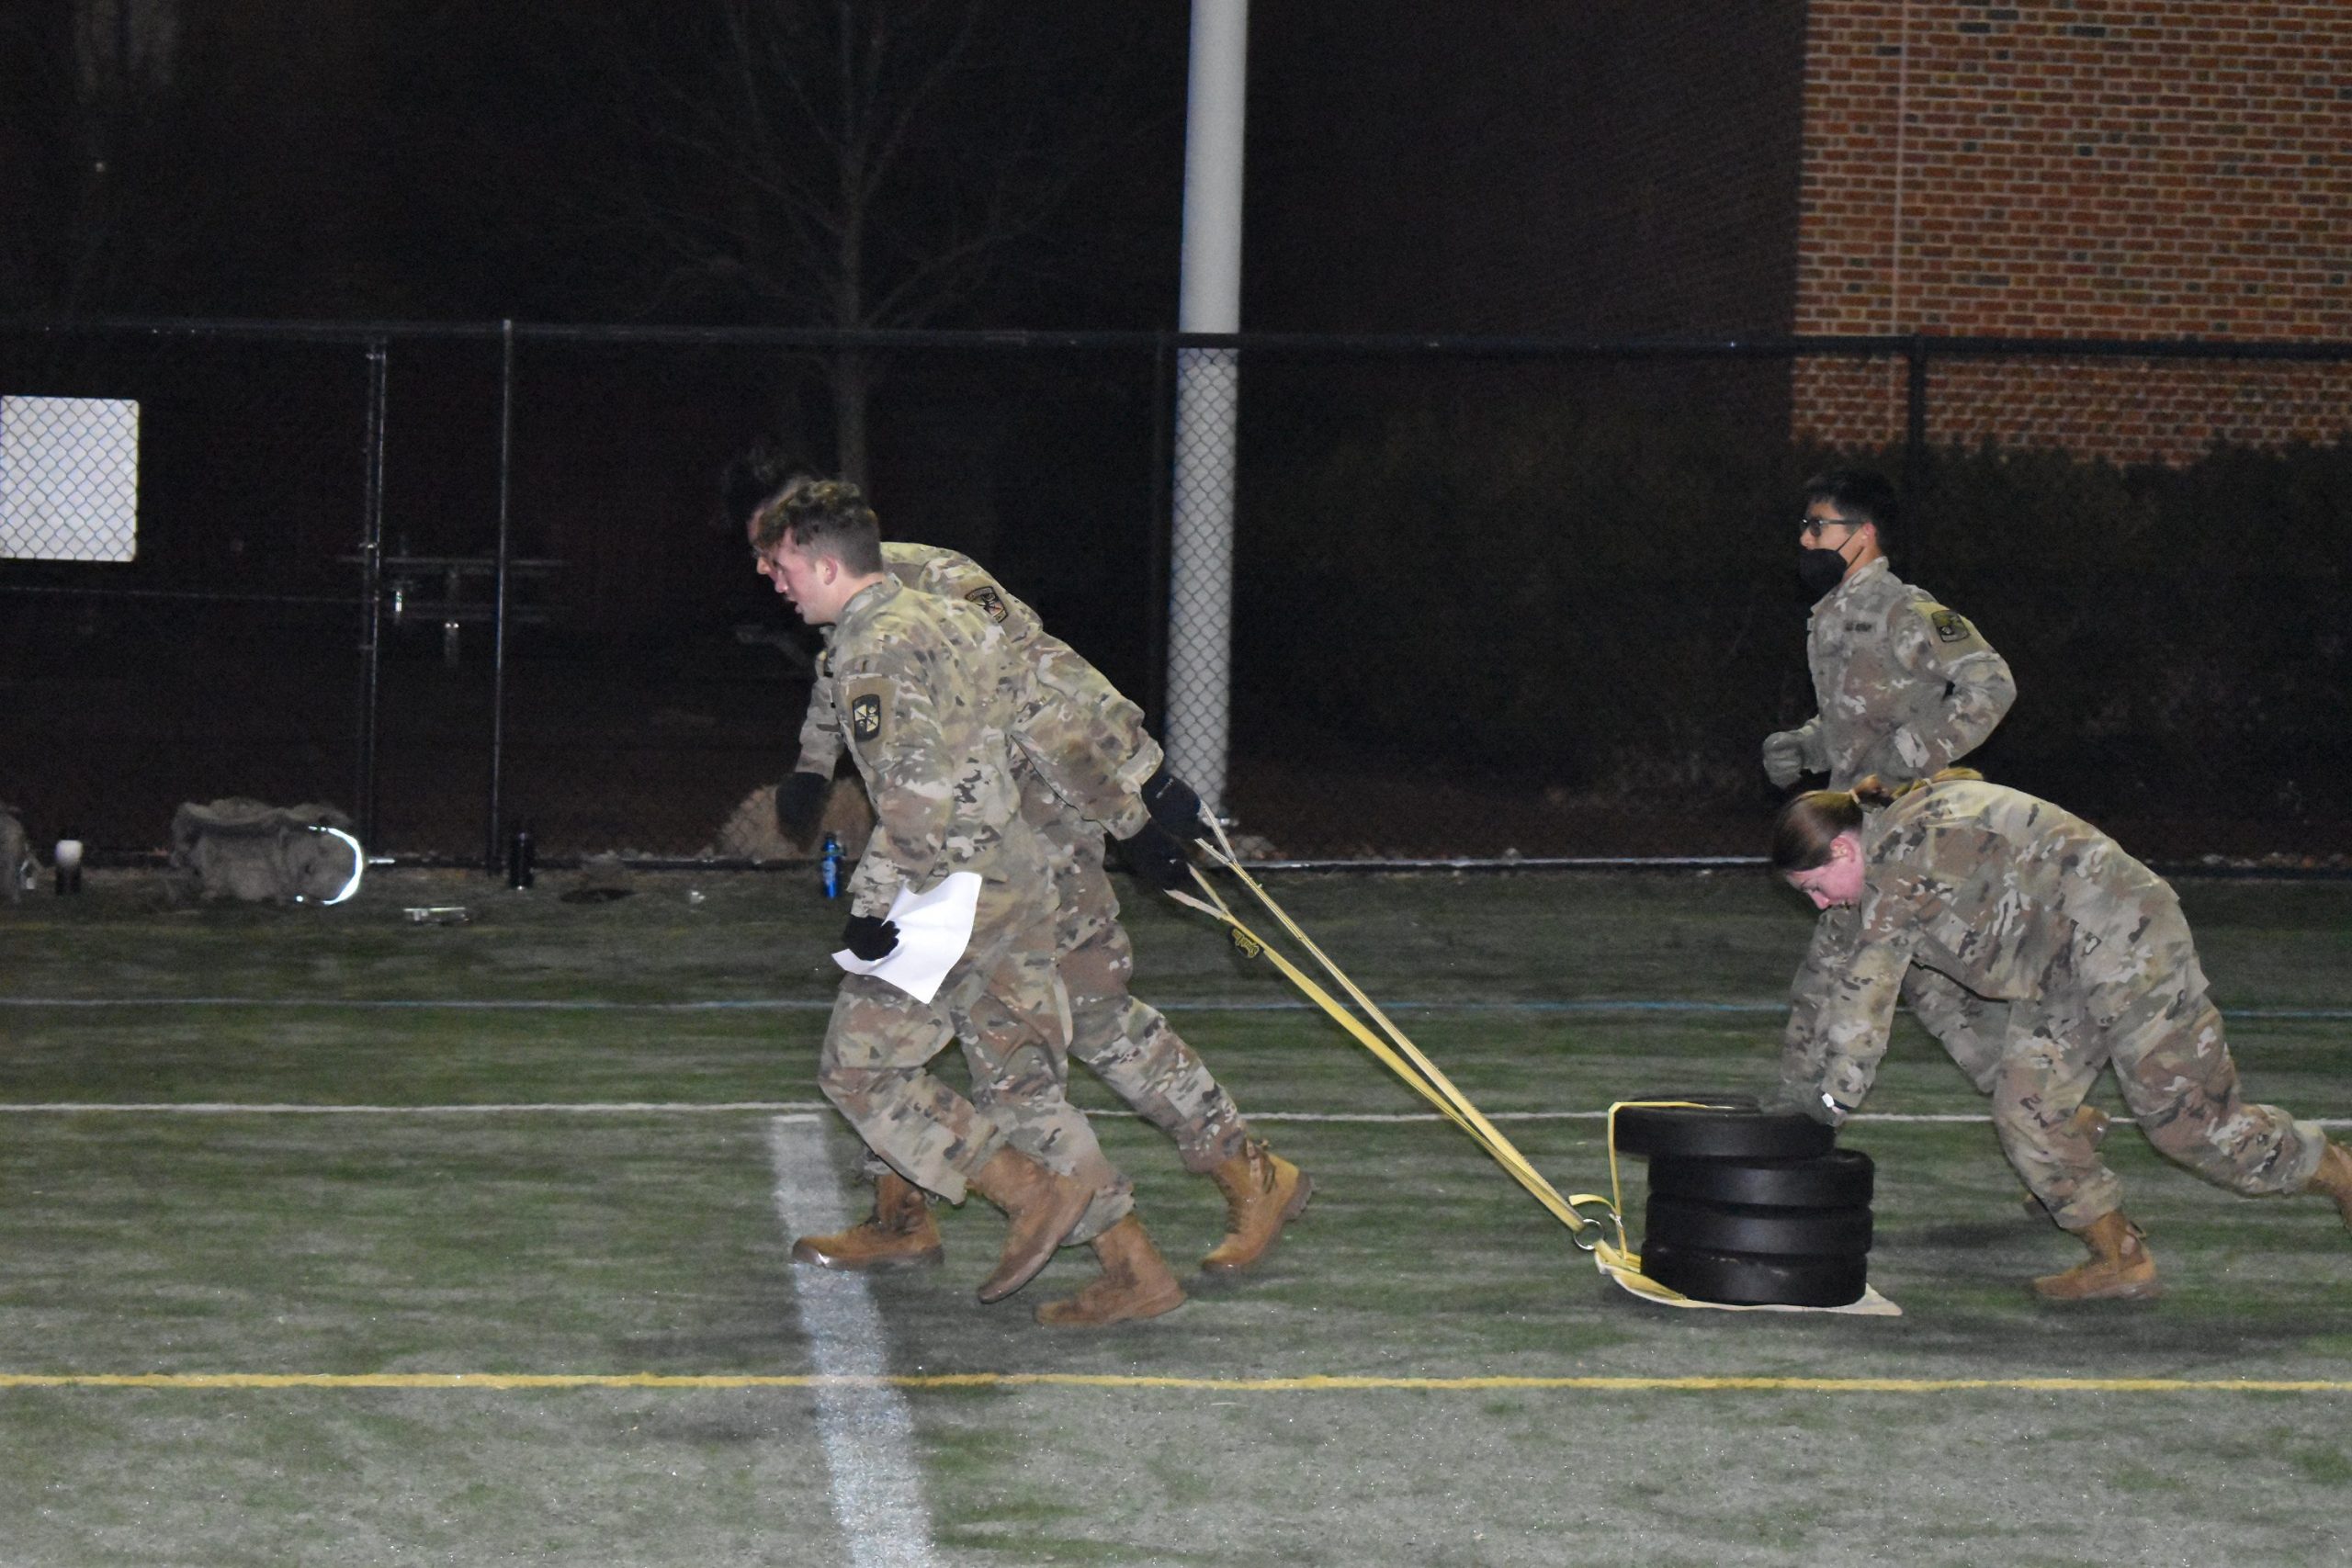 Cadets completing the drag event